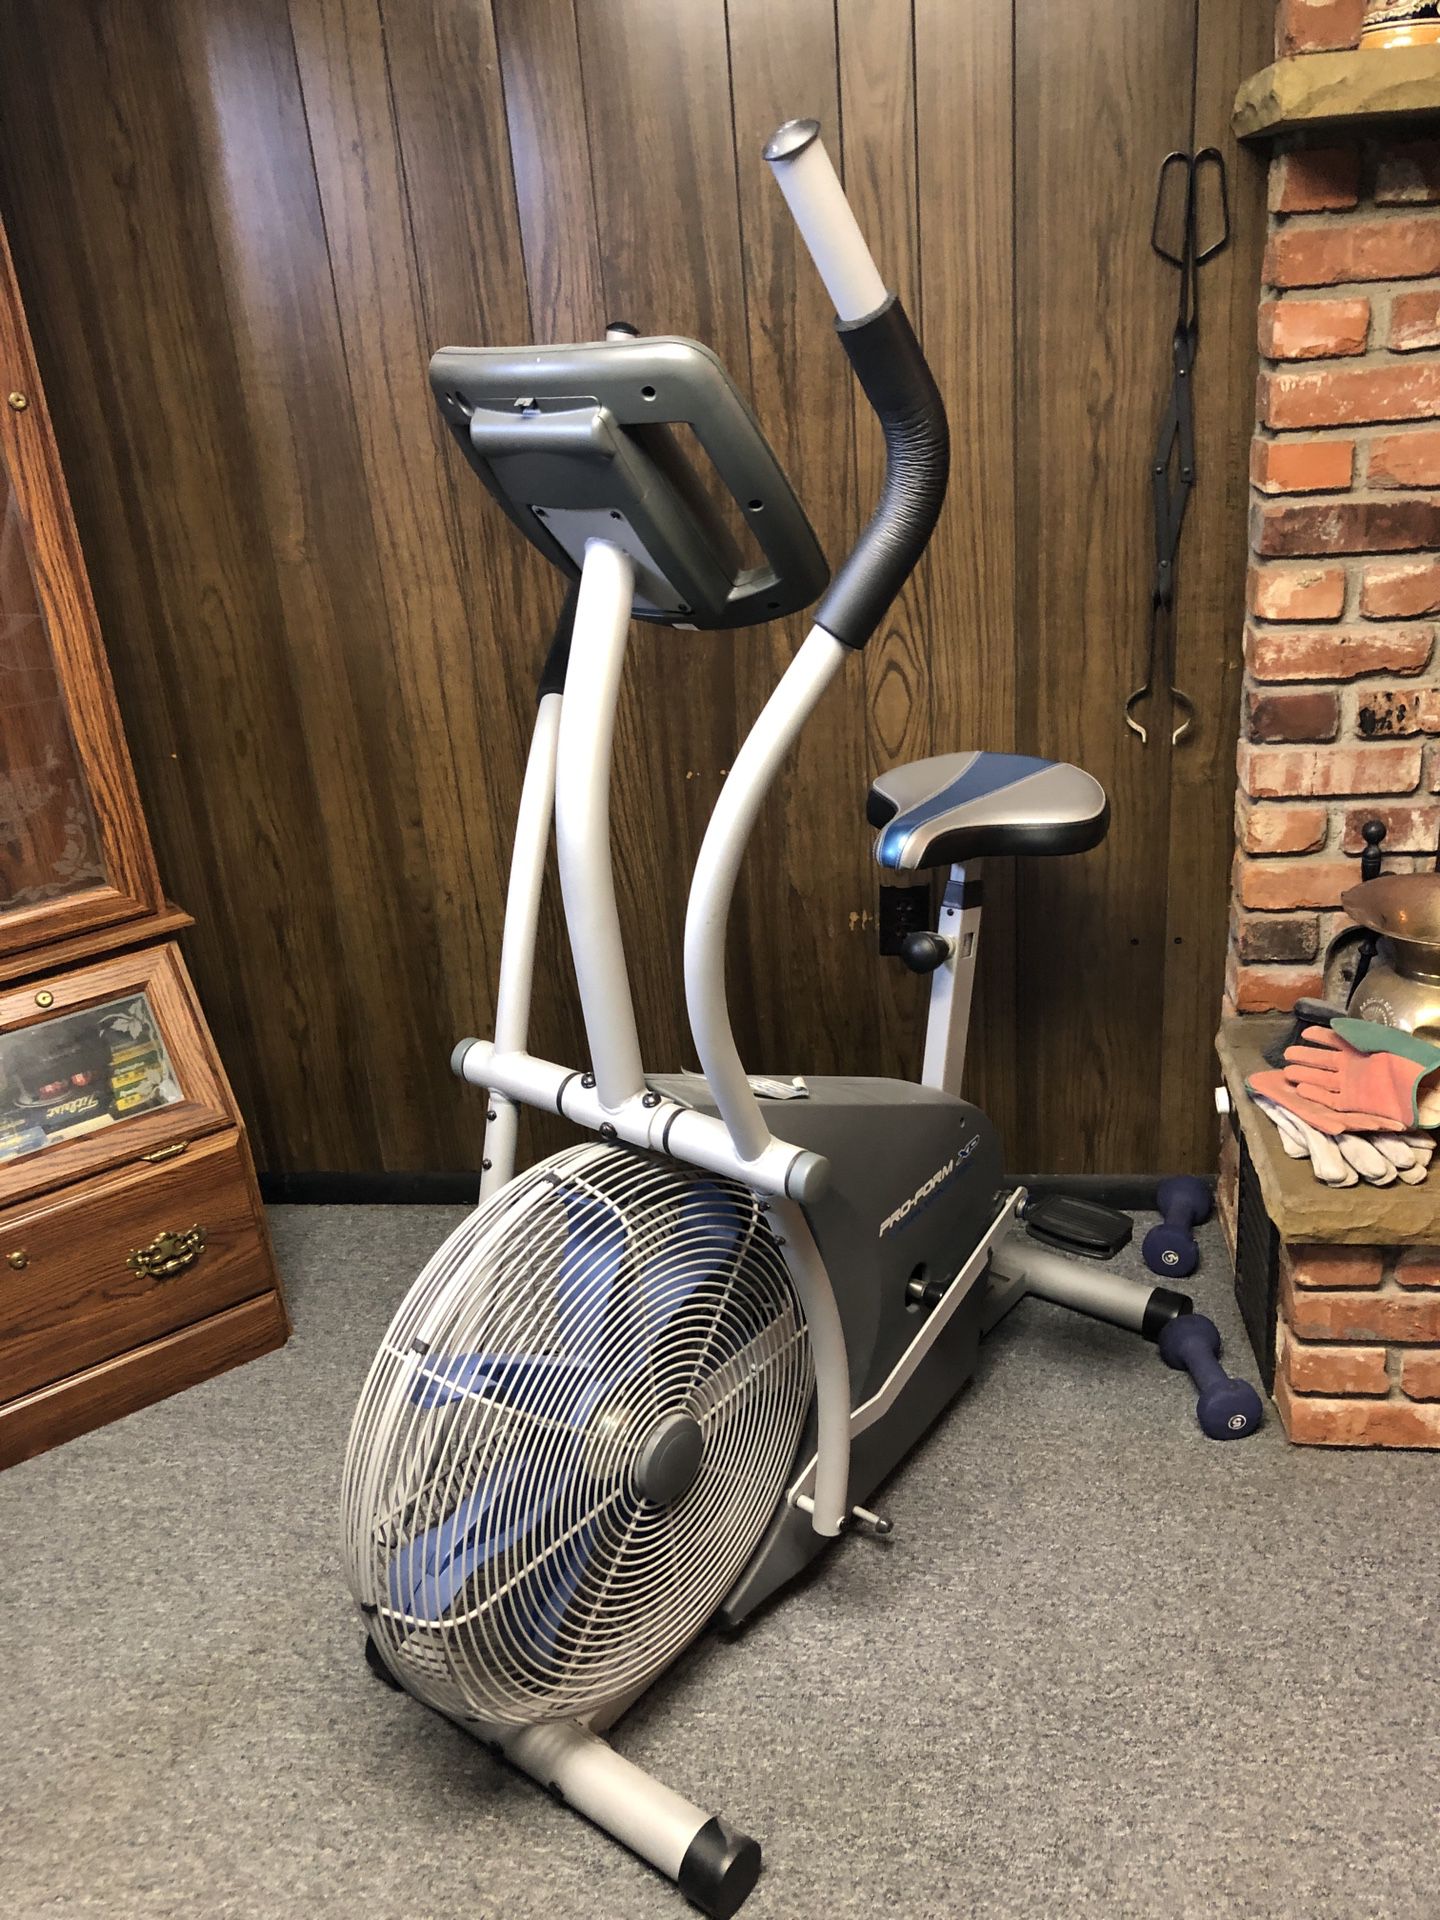 Pre Form XP exercise Bike